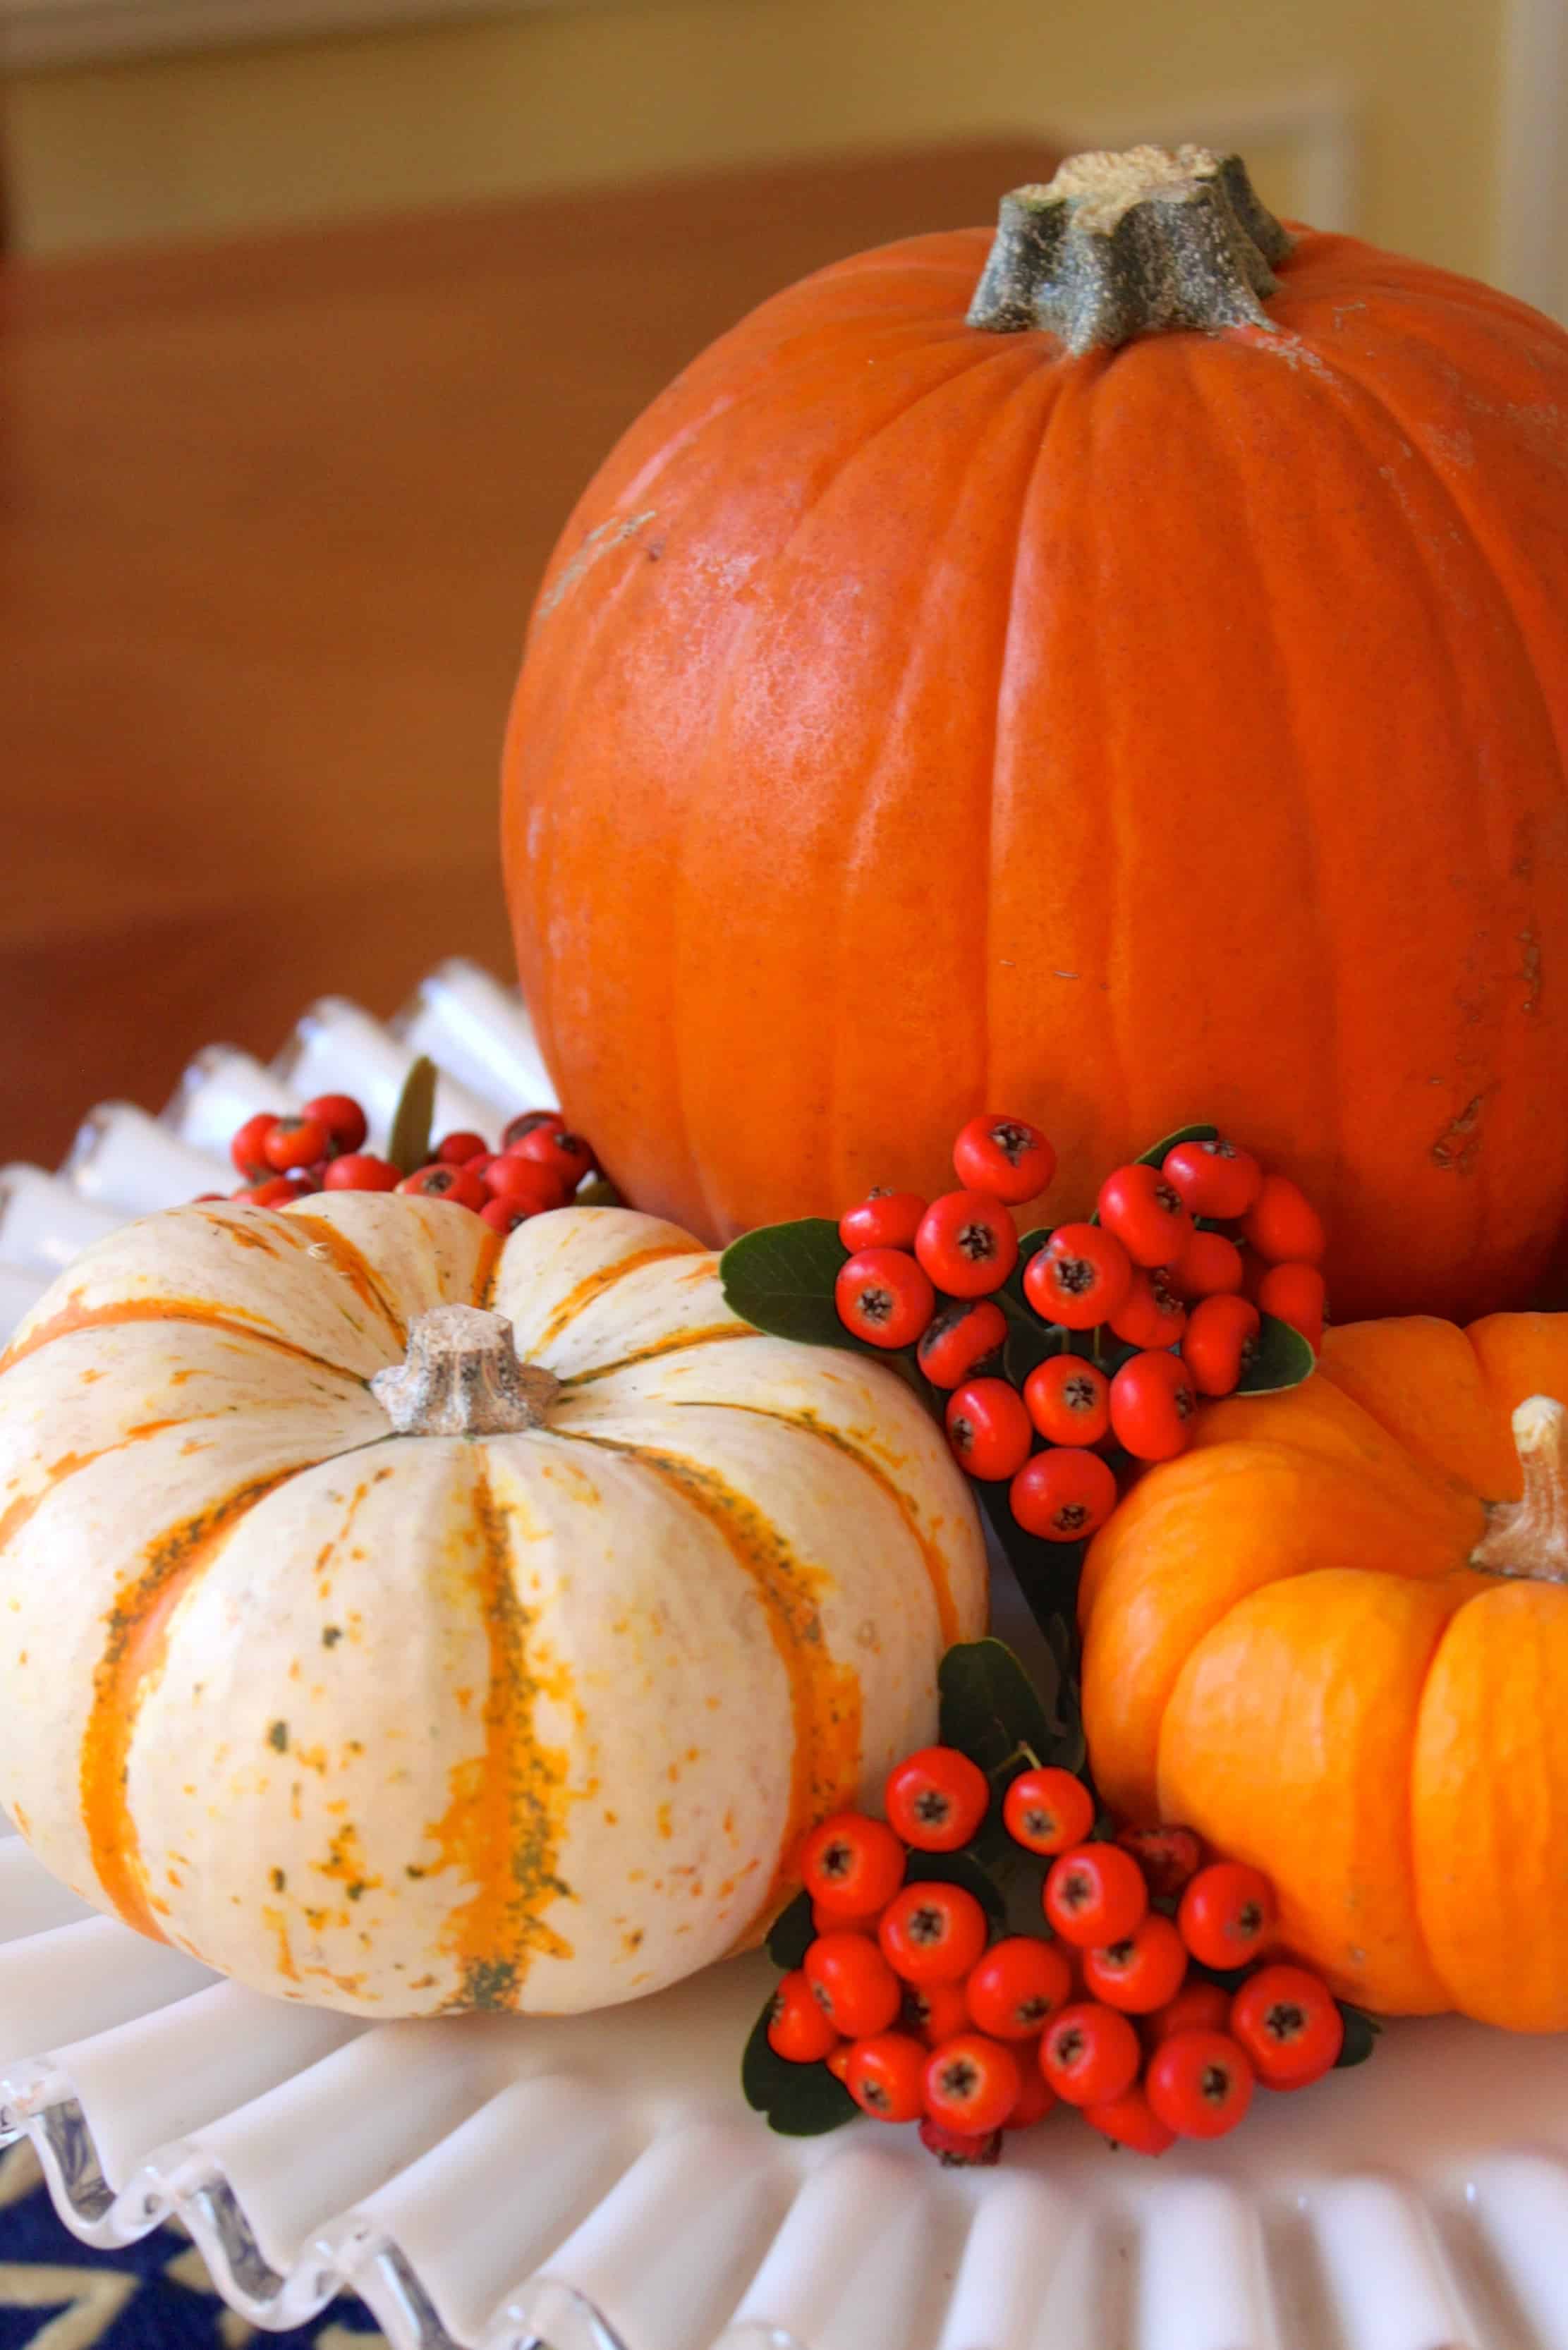 How to Prepare a Pumpkin (How to Cook, Bake or Roast a ...